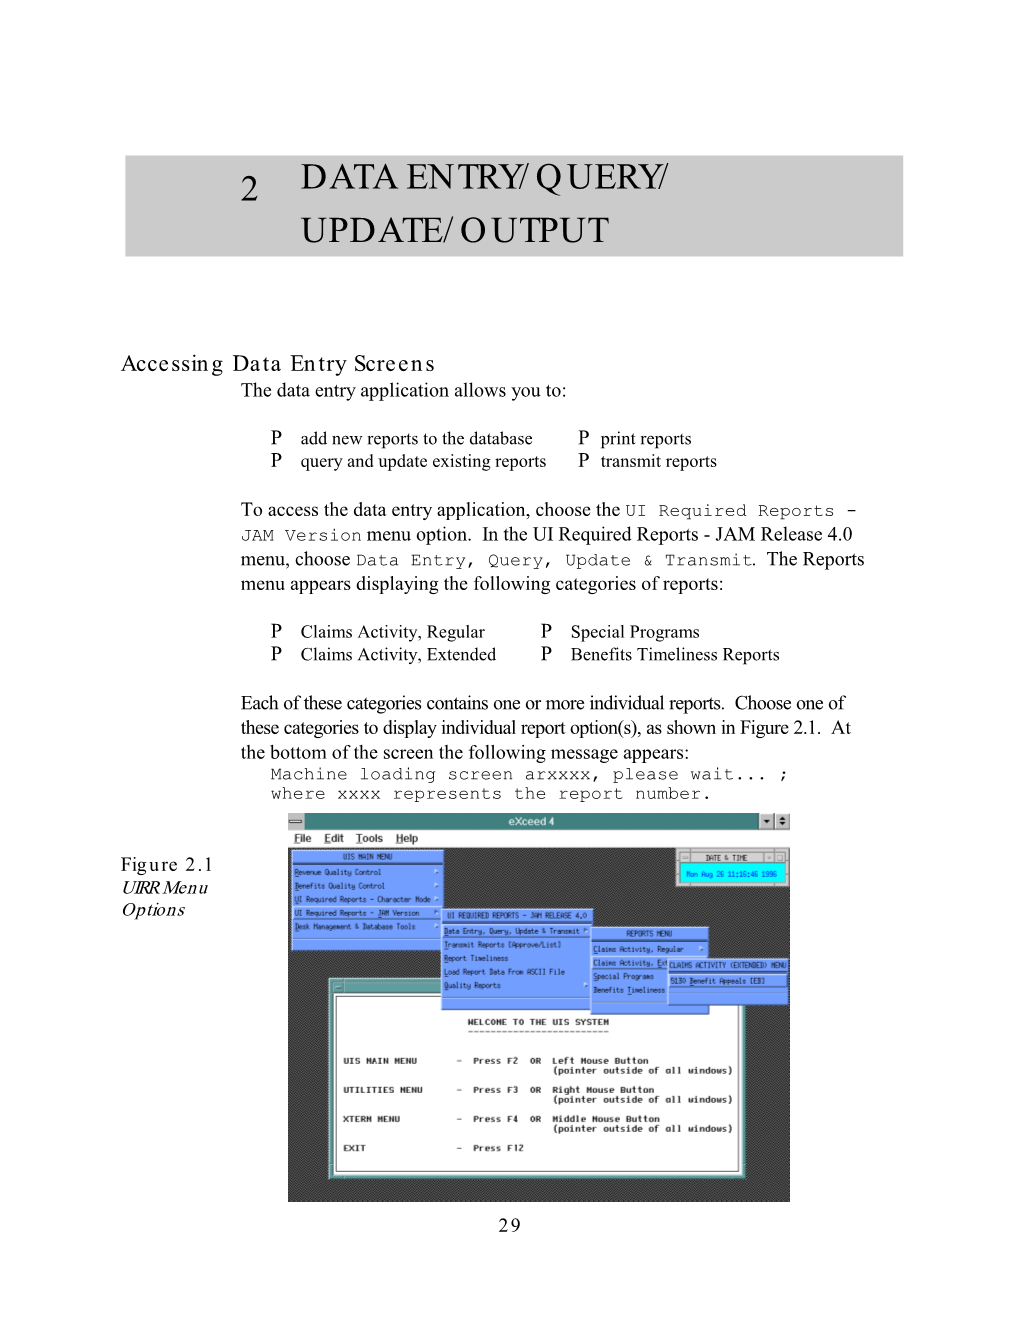 2 Data Entry/Query/ Update/Output